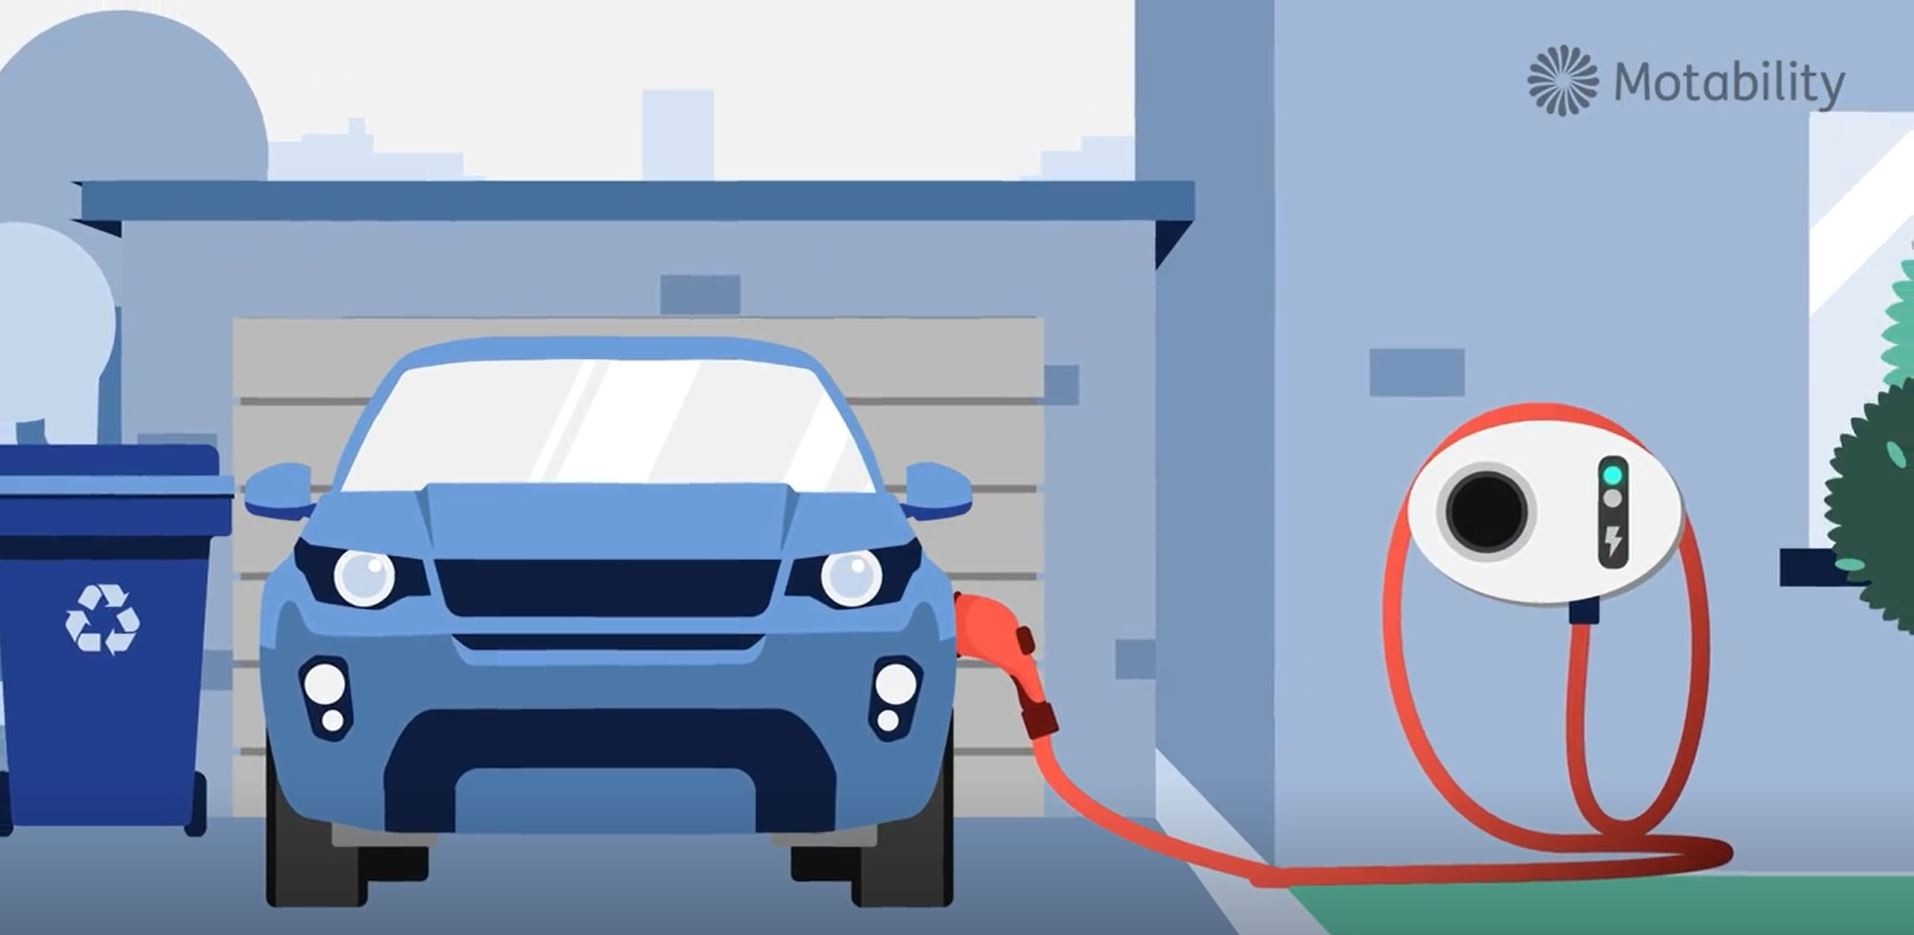 An electric vehicle is charging outside a home and garage.